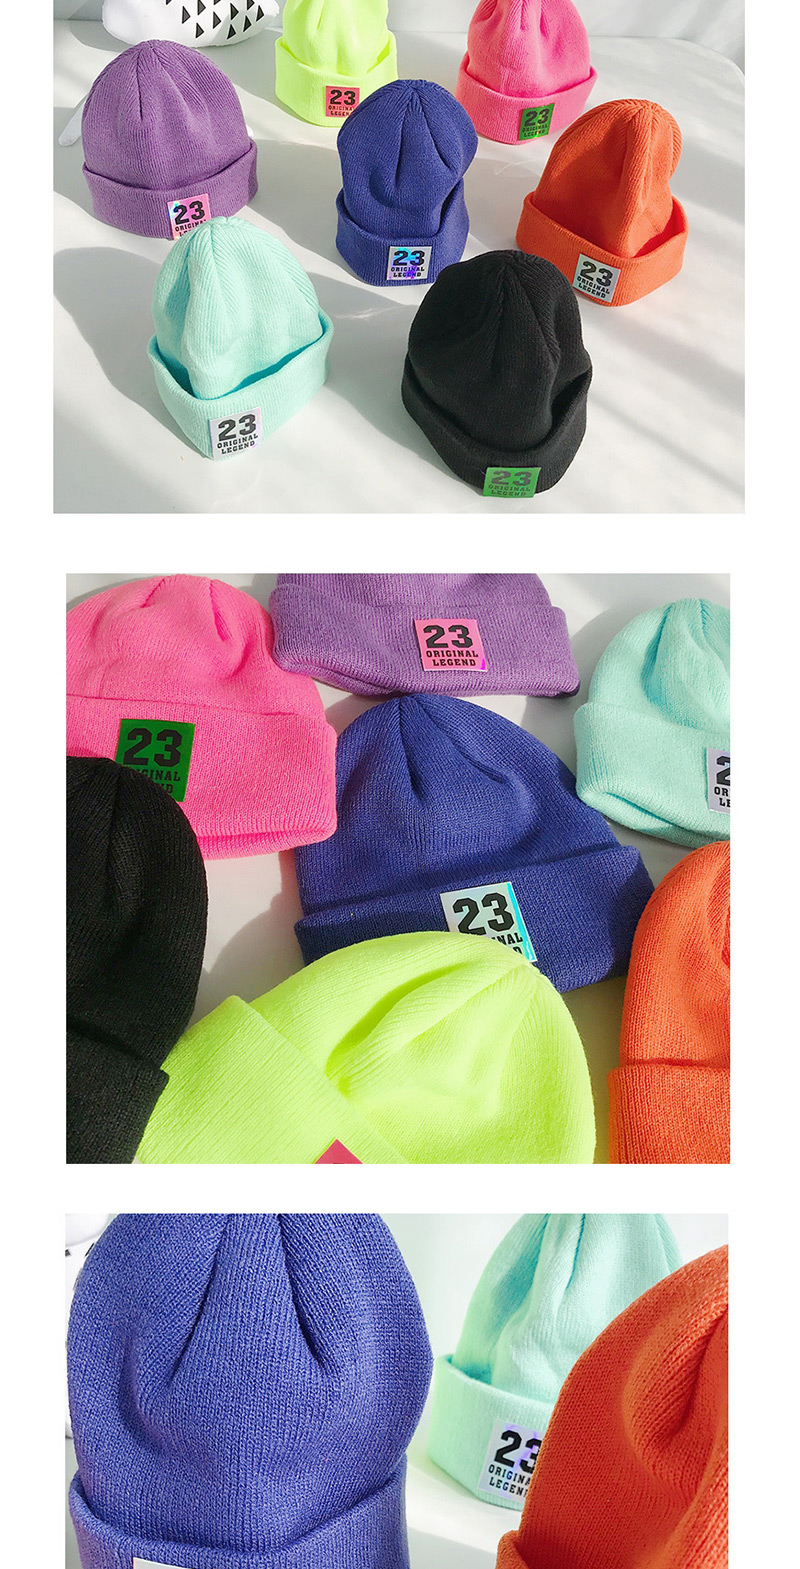 Fashion 23 Labeling Mint Green Pointed 23 Labeling Knitted Wool Cap,Knitting Wool Hats